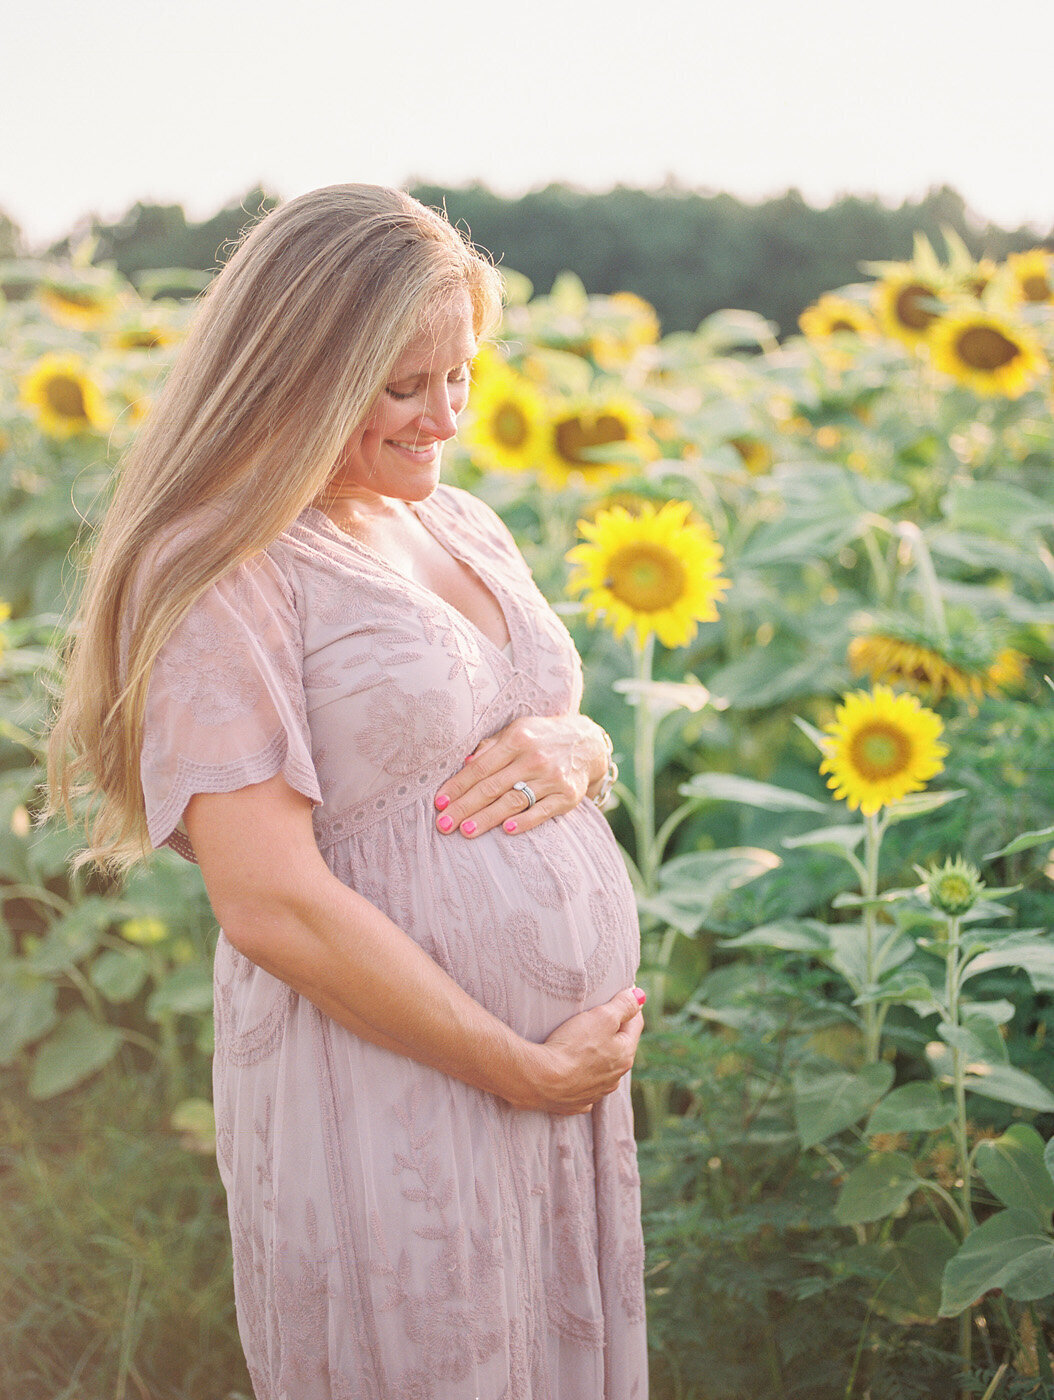 Raleigh Maternity Photographer | Jessica Agee Photography - 012